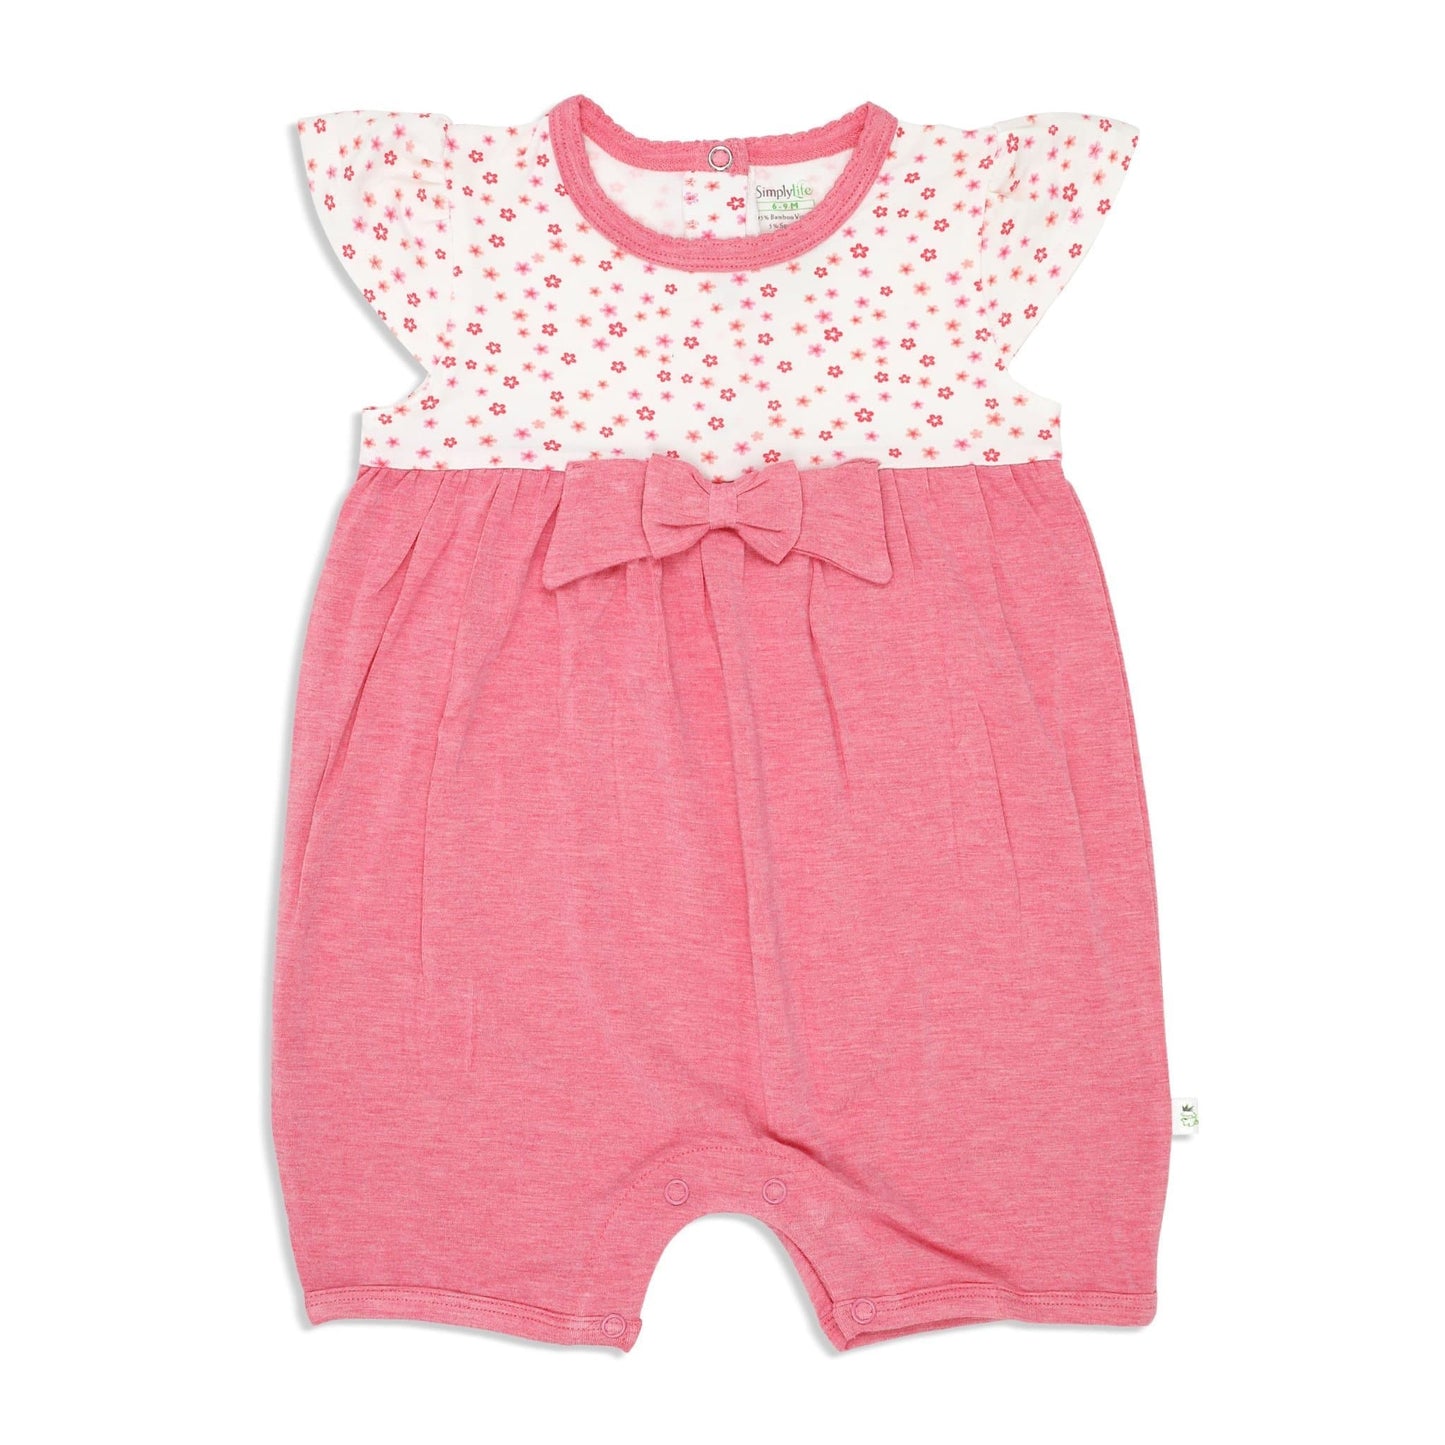 Floral - Shortall cap-sleeved with bow & puffed trims at neckline - Simply Life